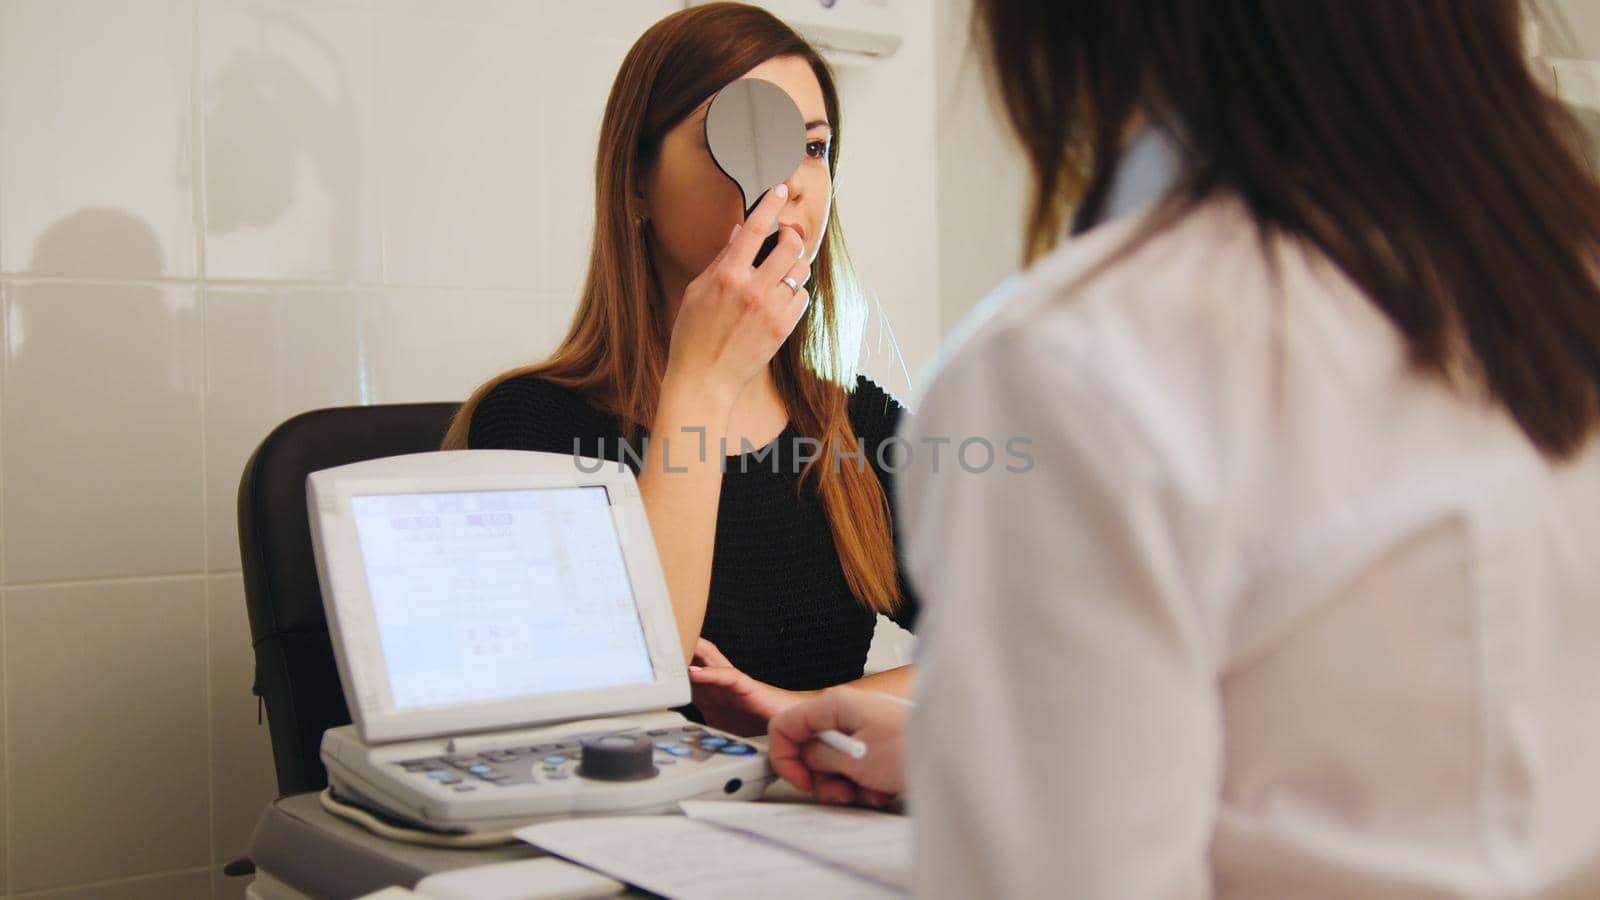 Ophthalmology - white woman checks vision in an ophthalmologist room - short-sighted and squints by Studia72